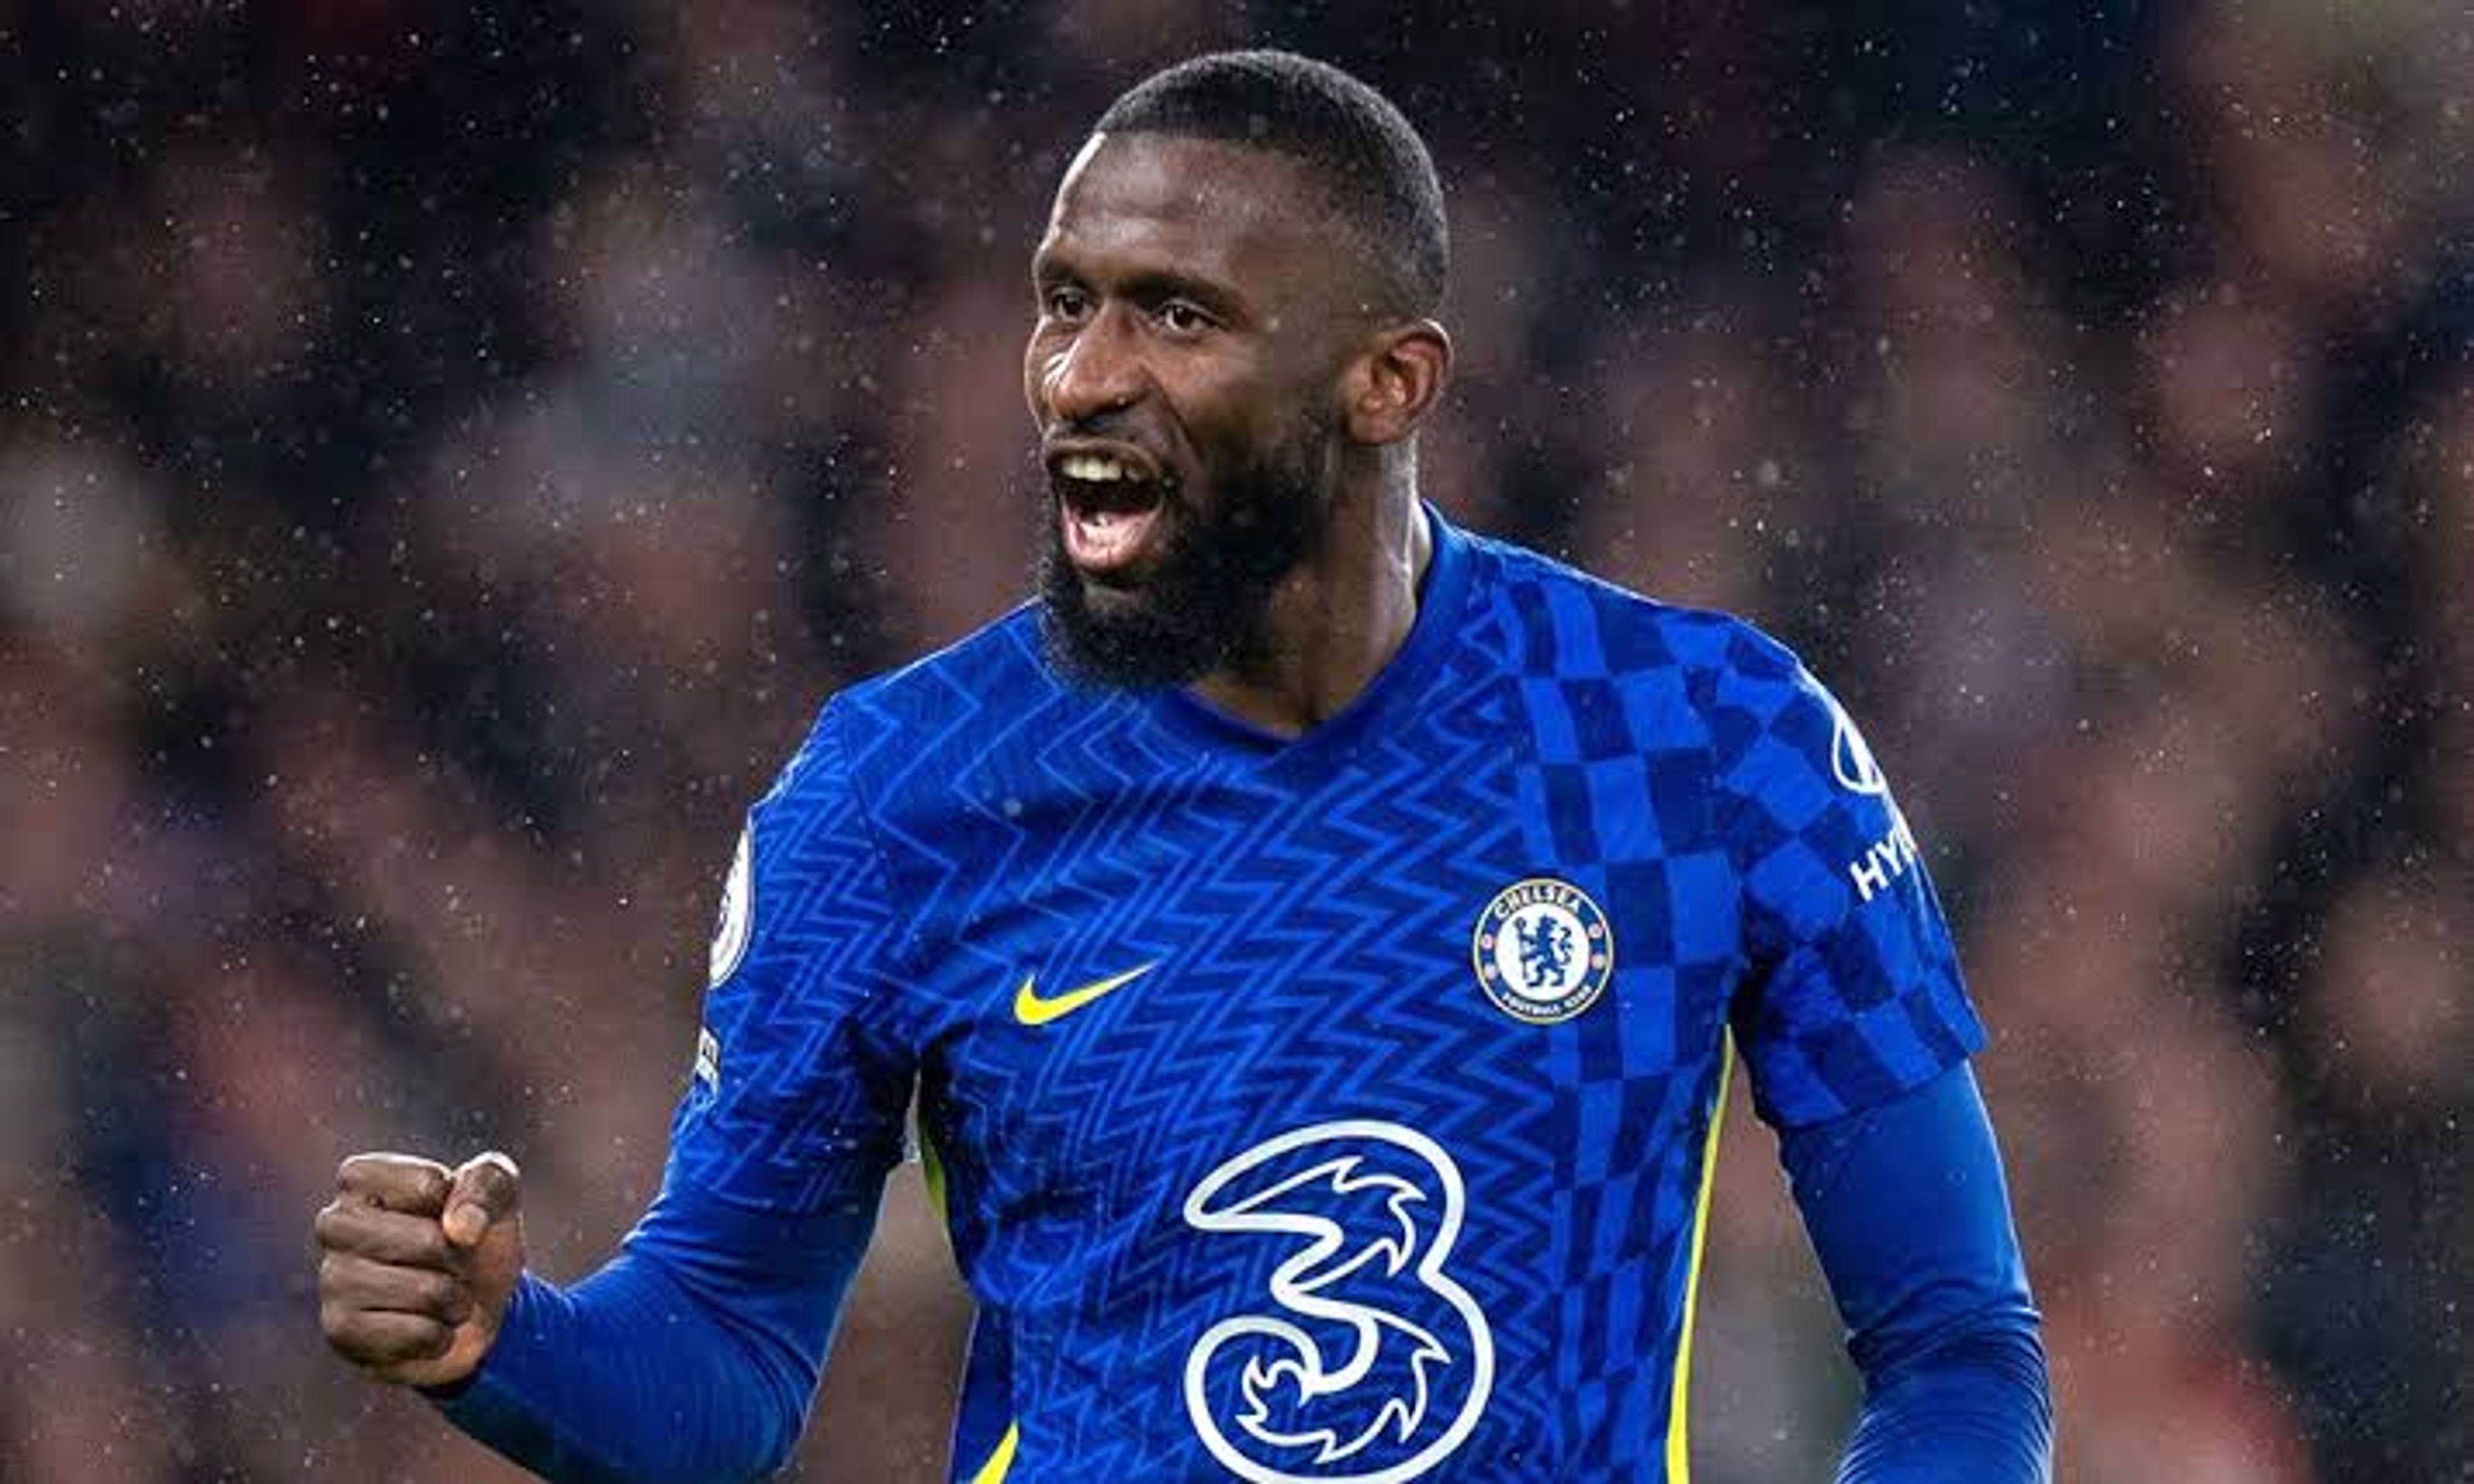 Cover Image for RUDIGER’S CONTRACT TALK: 2 reasons why Chelsea failed to agree a new deal with Antonio Rudiger.